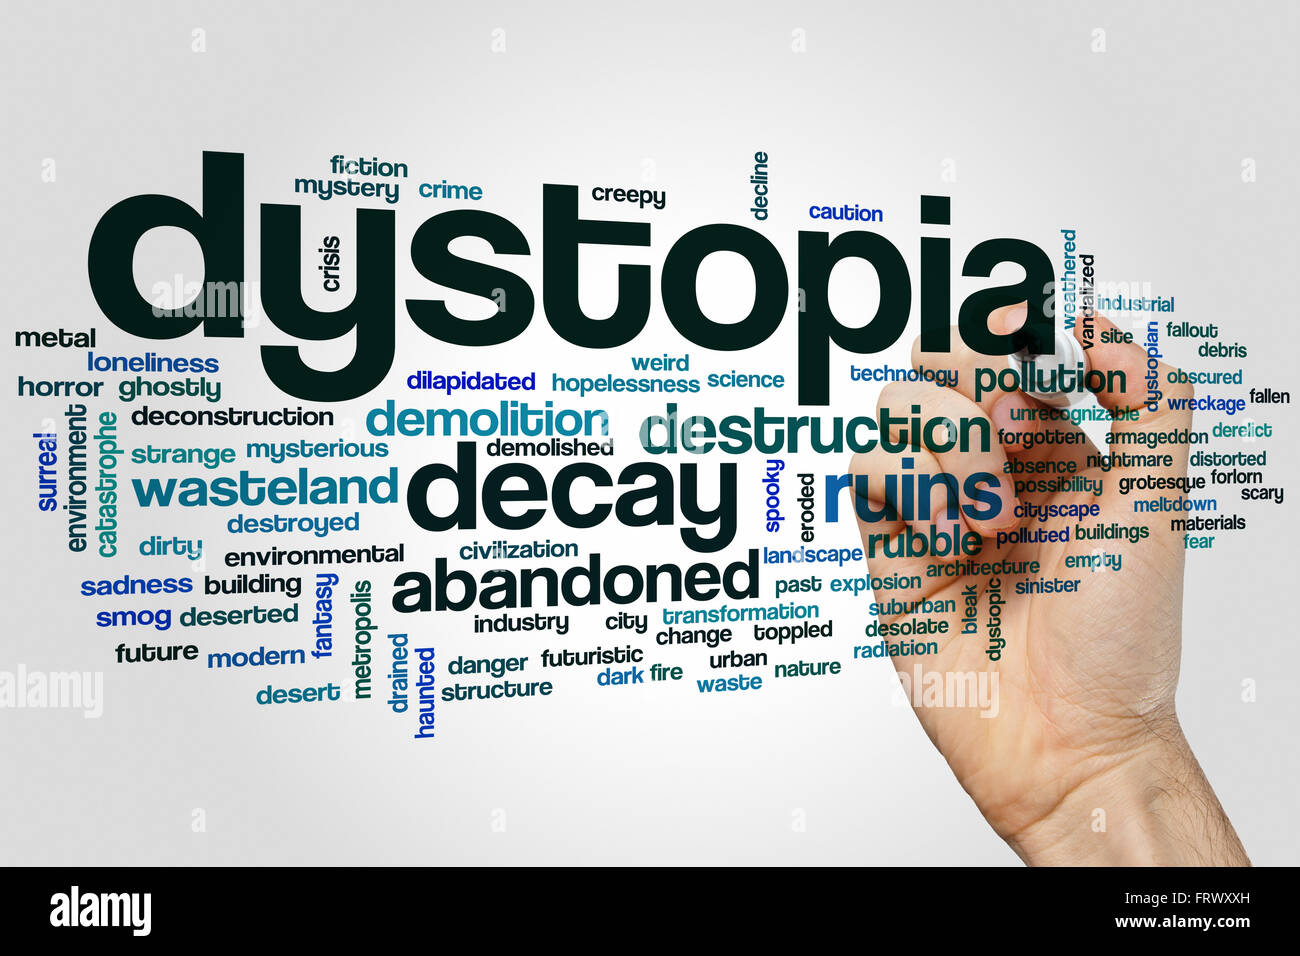 Dystopia concept word cloud background Stock Photo